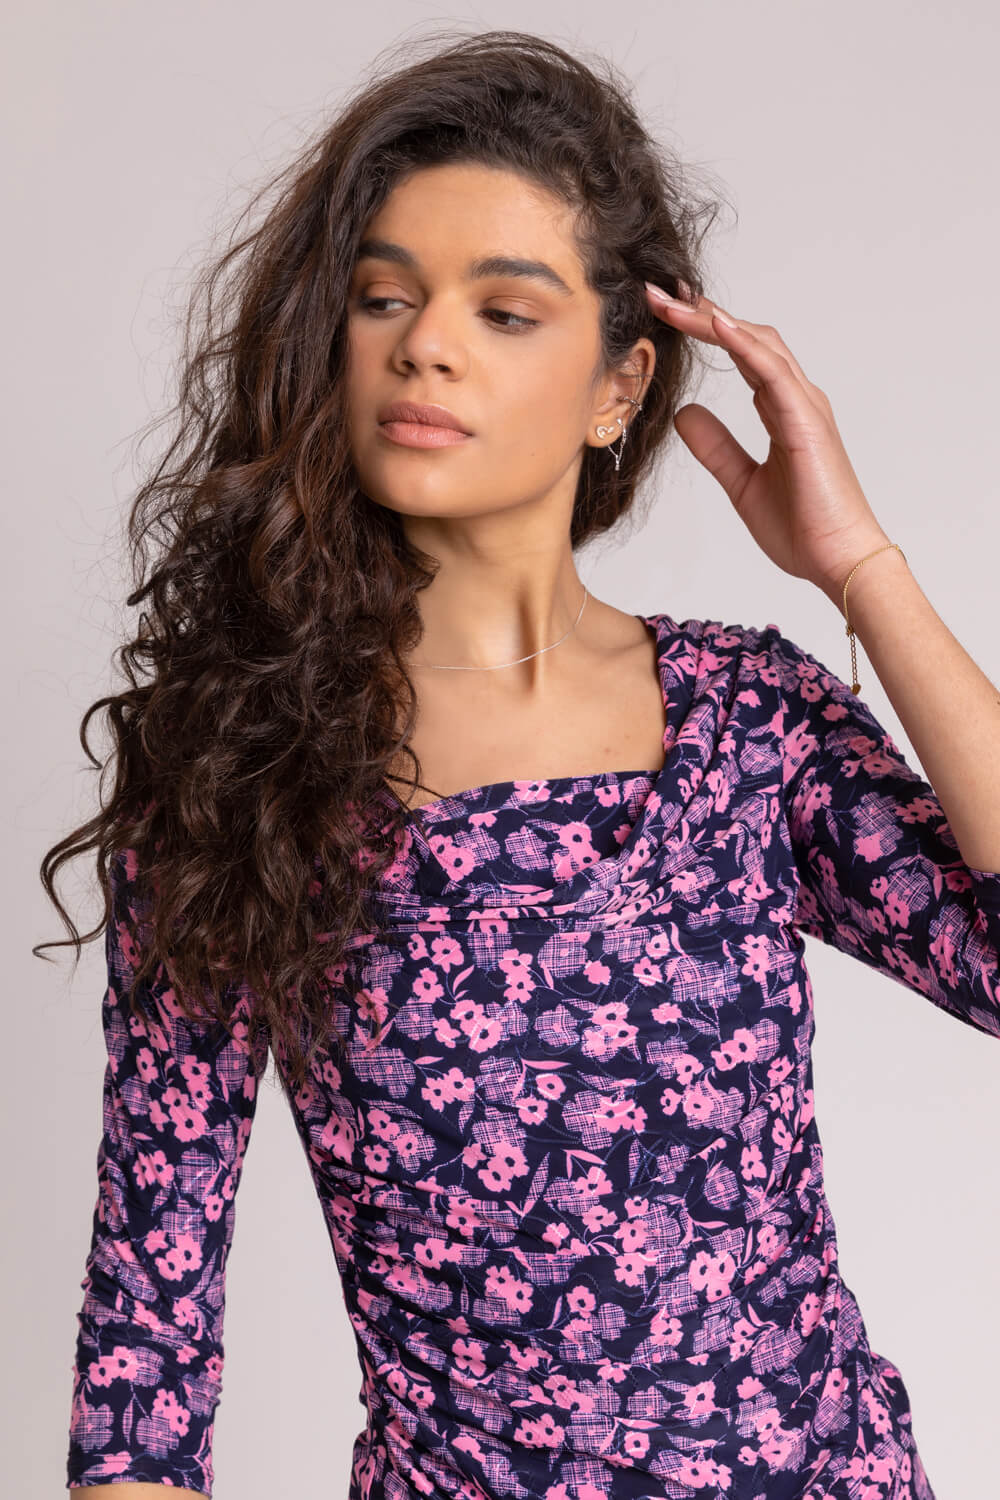 PINK Floral Print Cowl Neck Top, Image 4 of 4